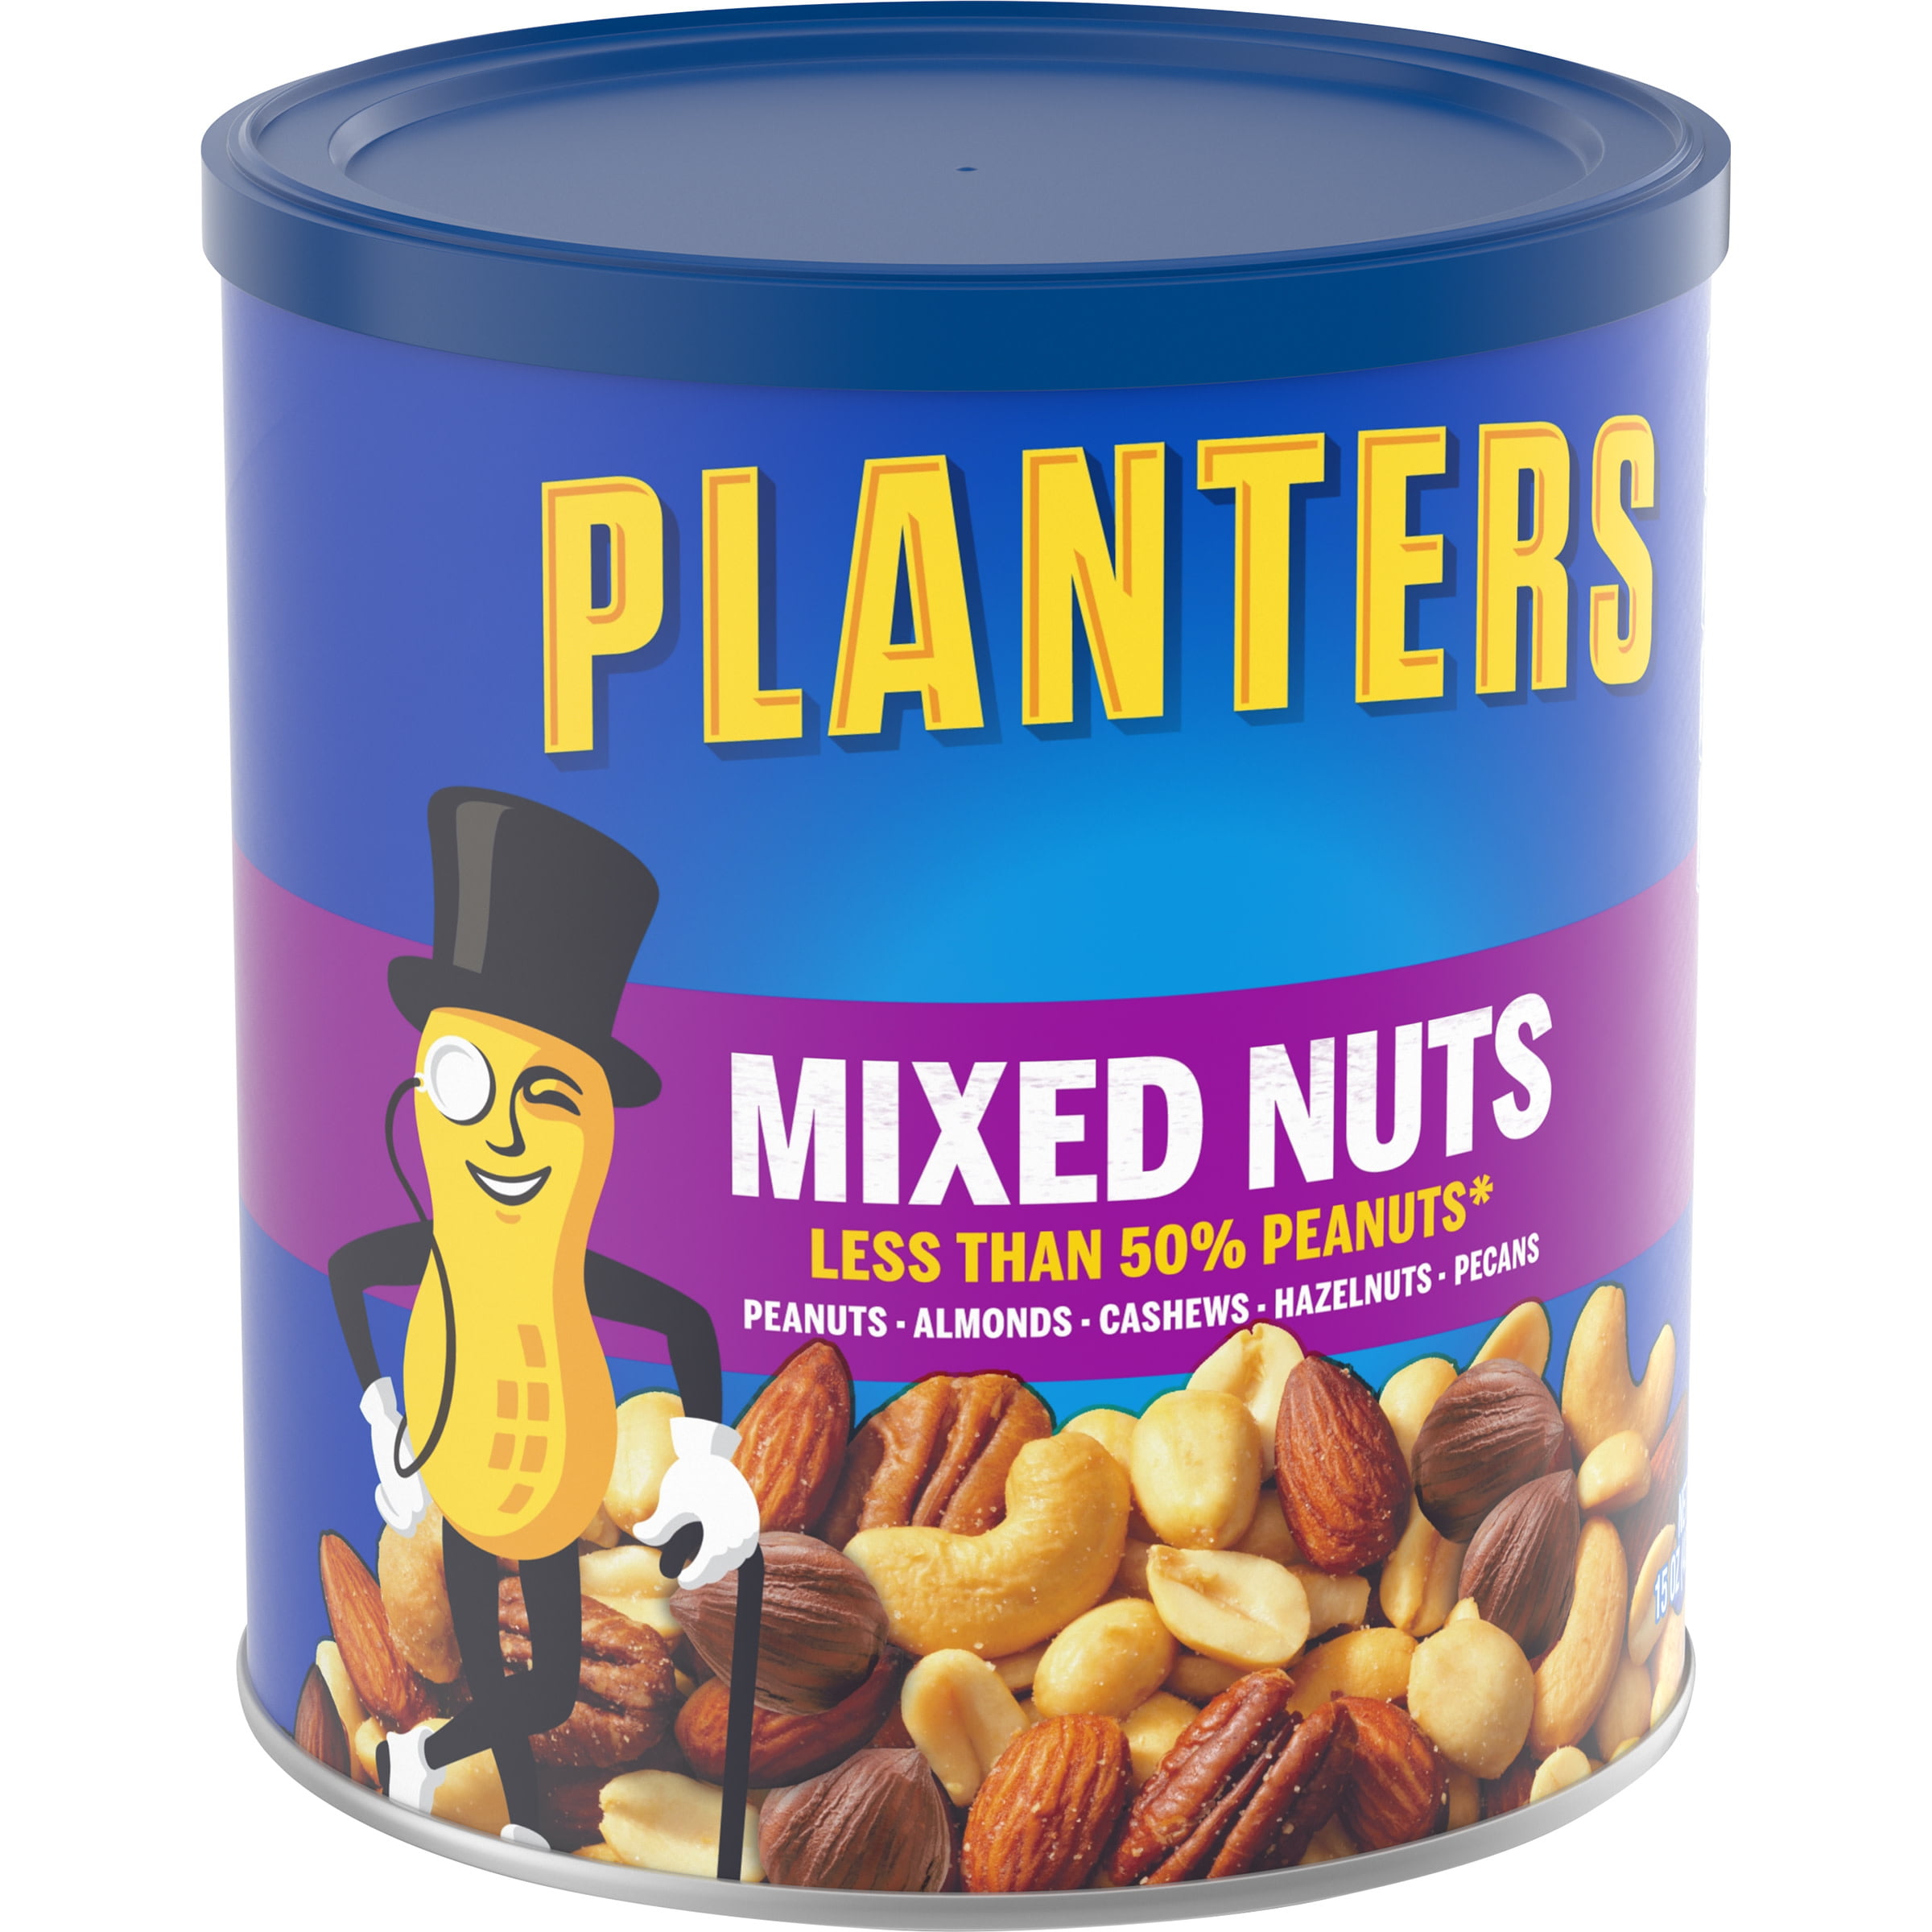 Planters Mixed Nuts, Lightly Salted, 15.0 oz Canister